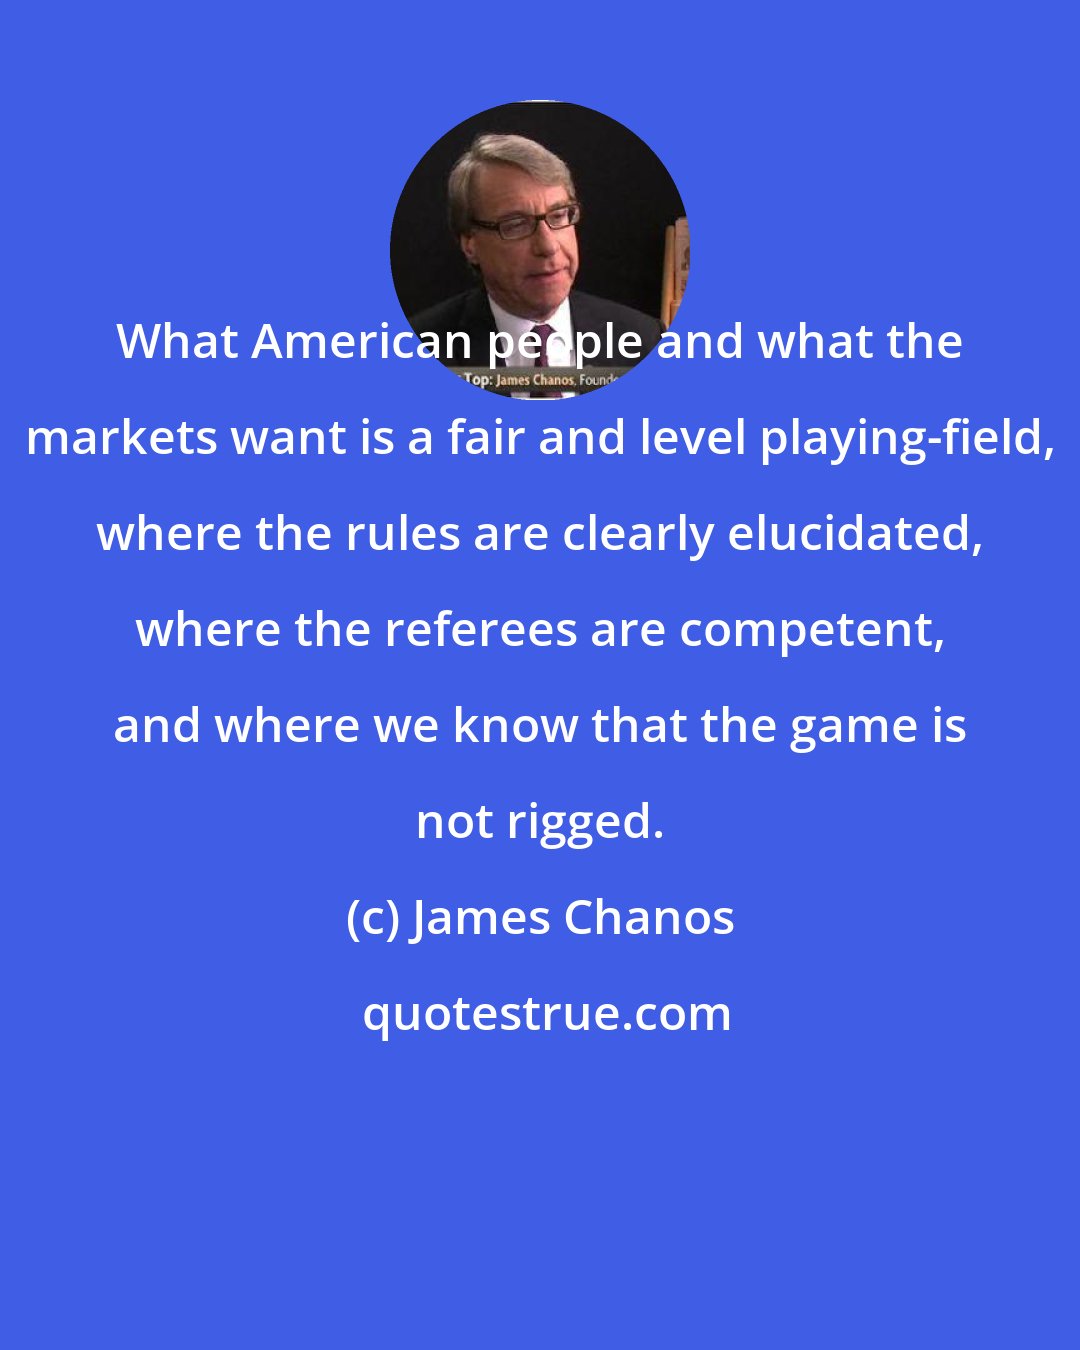 James Chanos: What American people and what the markets want is a fair and level playing-field, where the rules are clearly elucidated, where the referees are competent, and where we know that the game is not rigged.